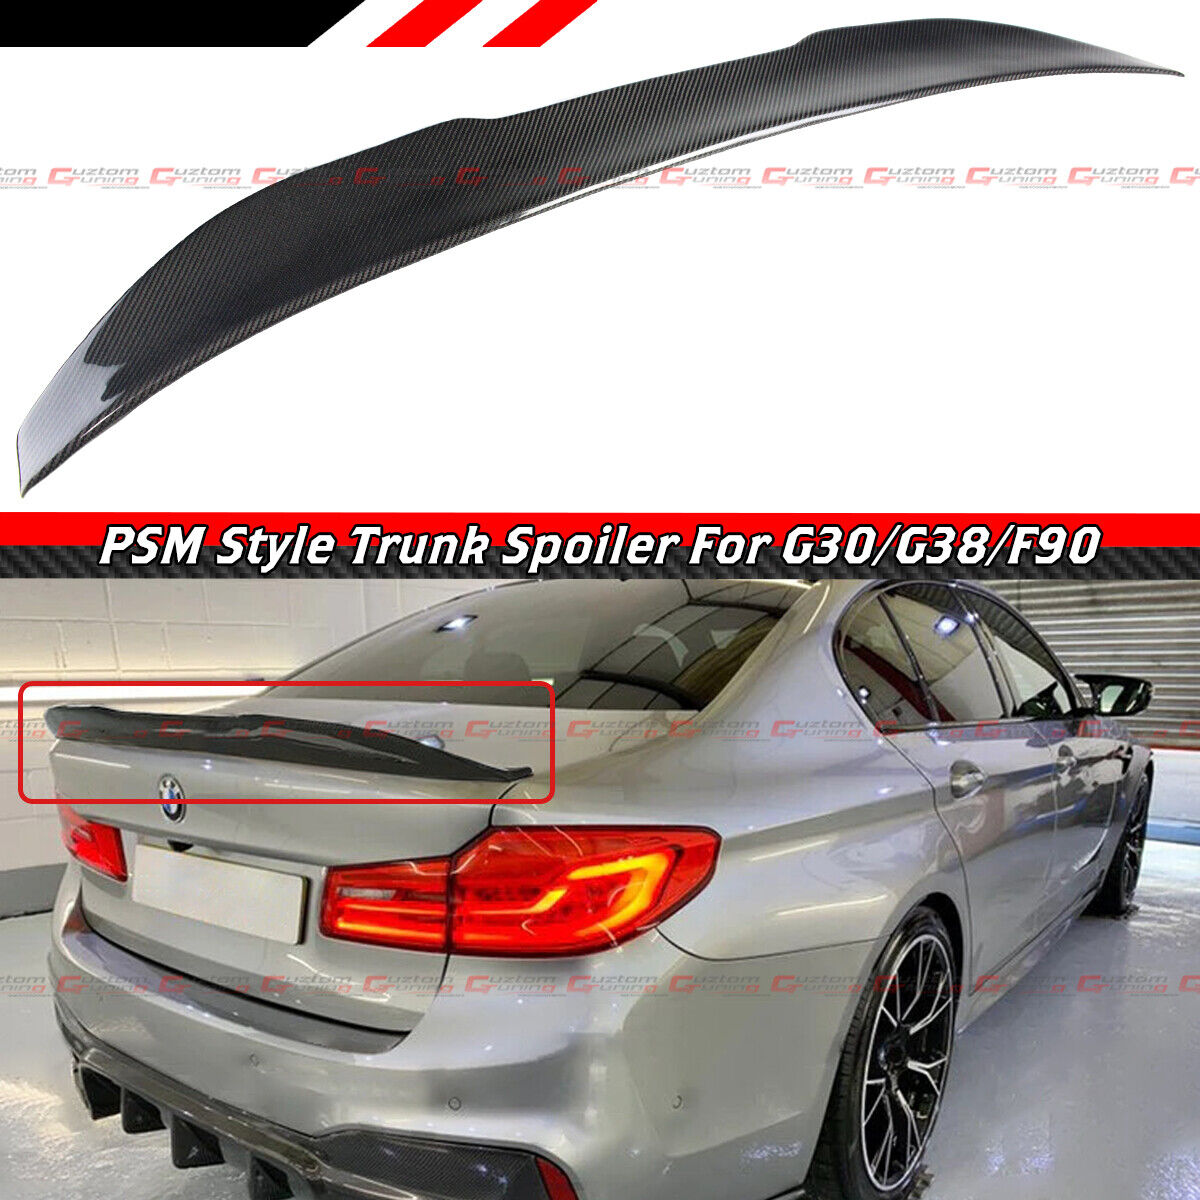 FOR 17-23 BMW G30 G38 5 SERIES F90 M5 PSM STYLE CARBON FIBER TRUNK SPOILER WING